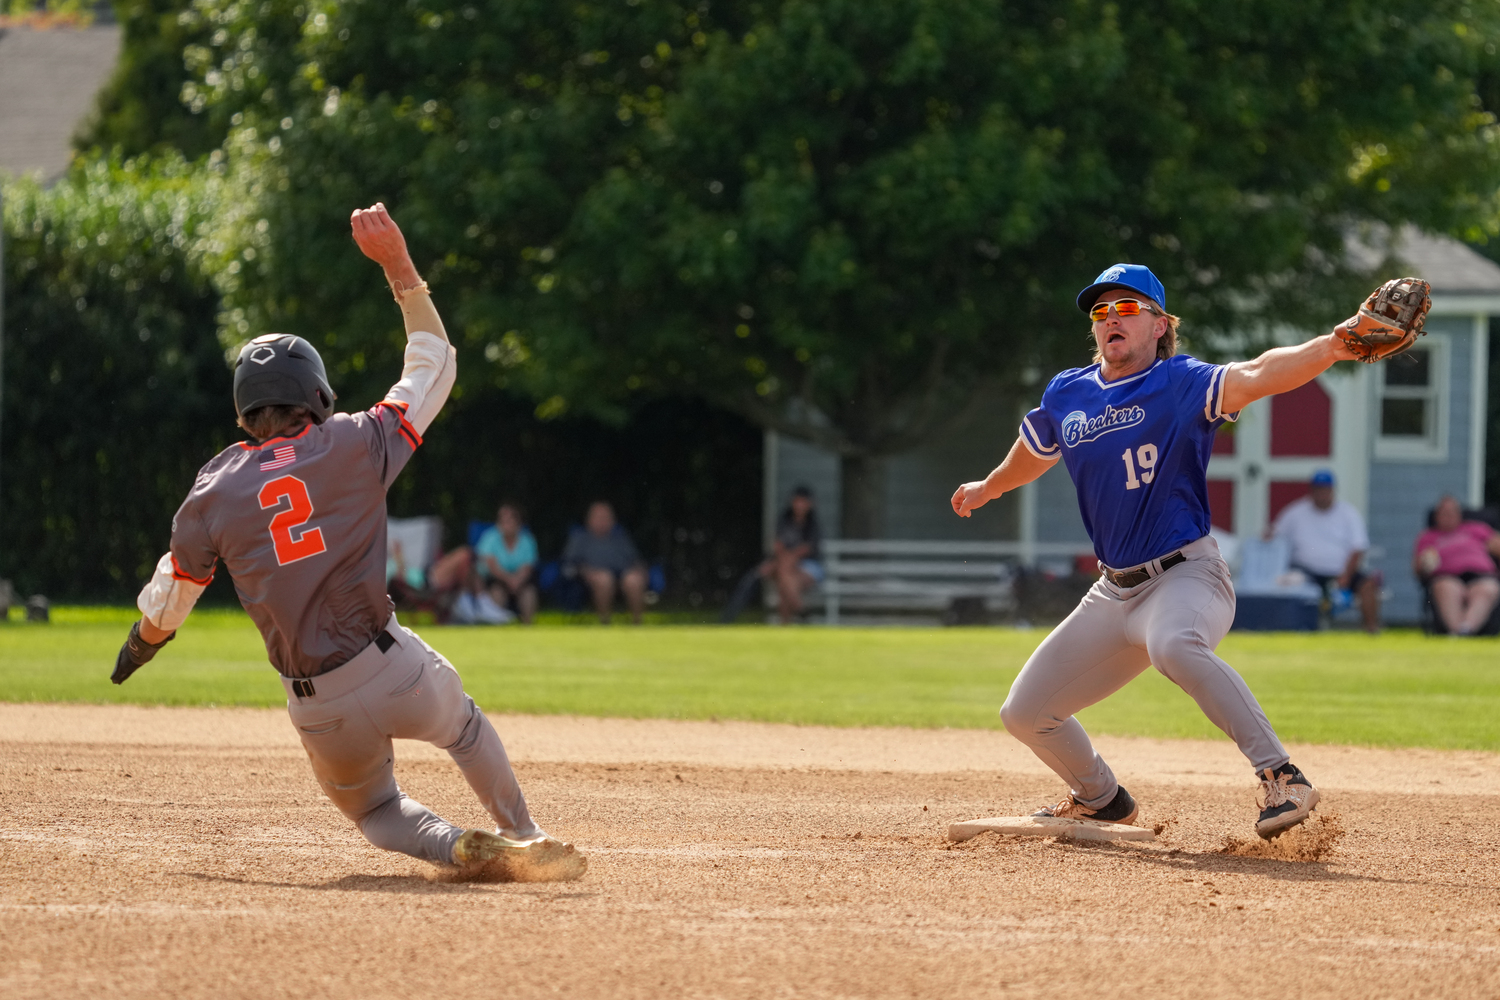 Southampton's Chad Pike (Oklahoma City) takes a slightly wide throw and tags out Shelter Island's Conor Kiely (Stonehill) at second base.   RON ESPOSITO